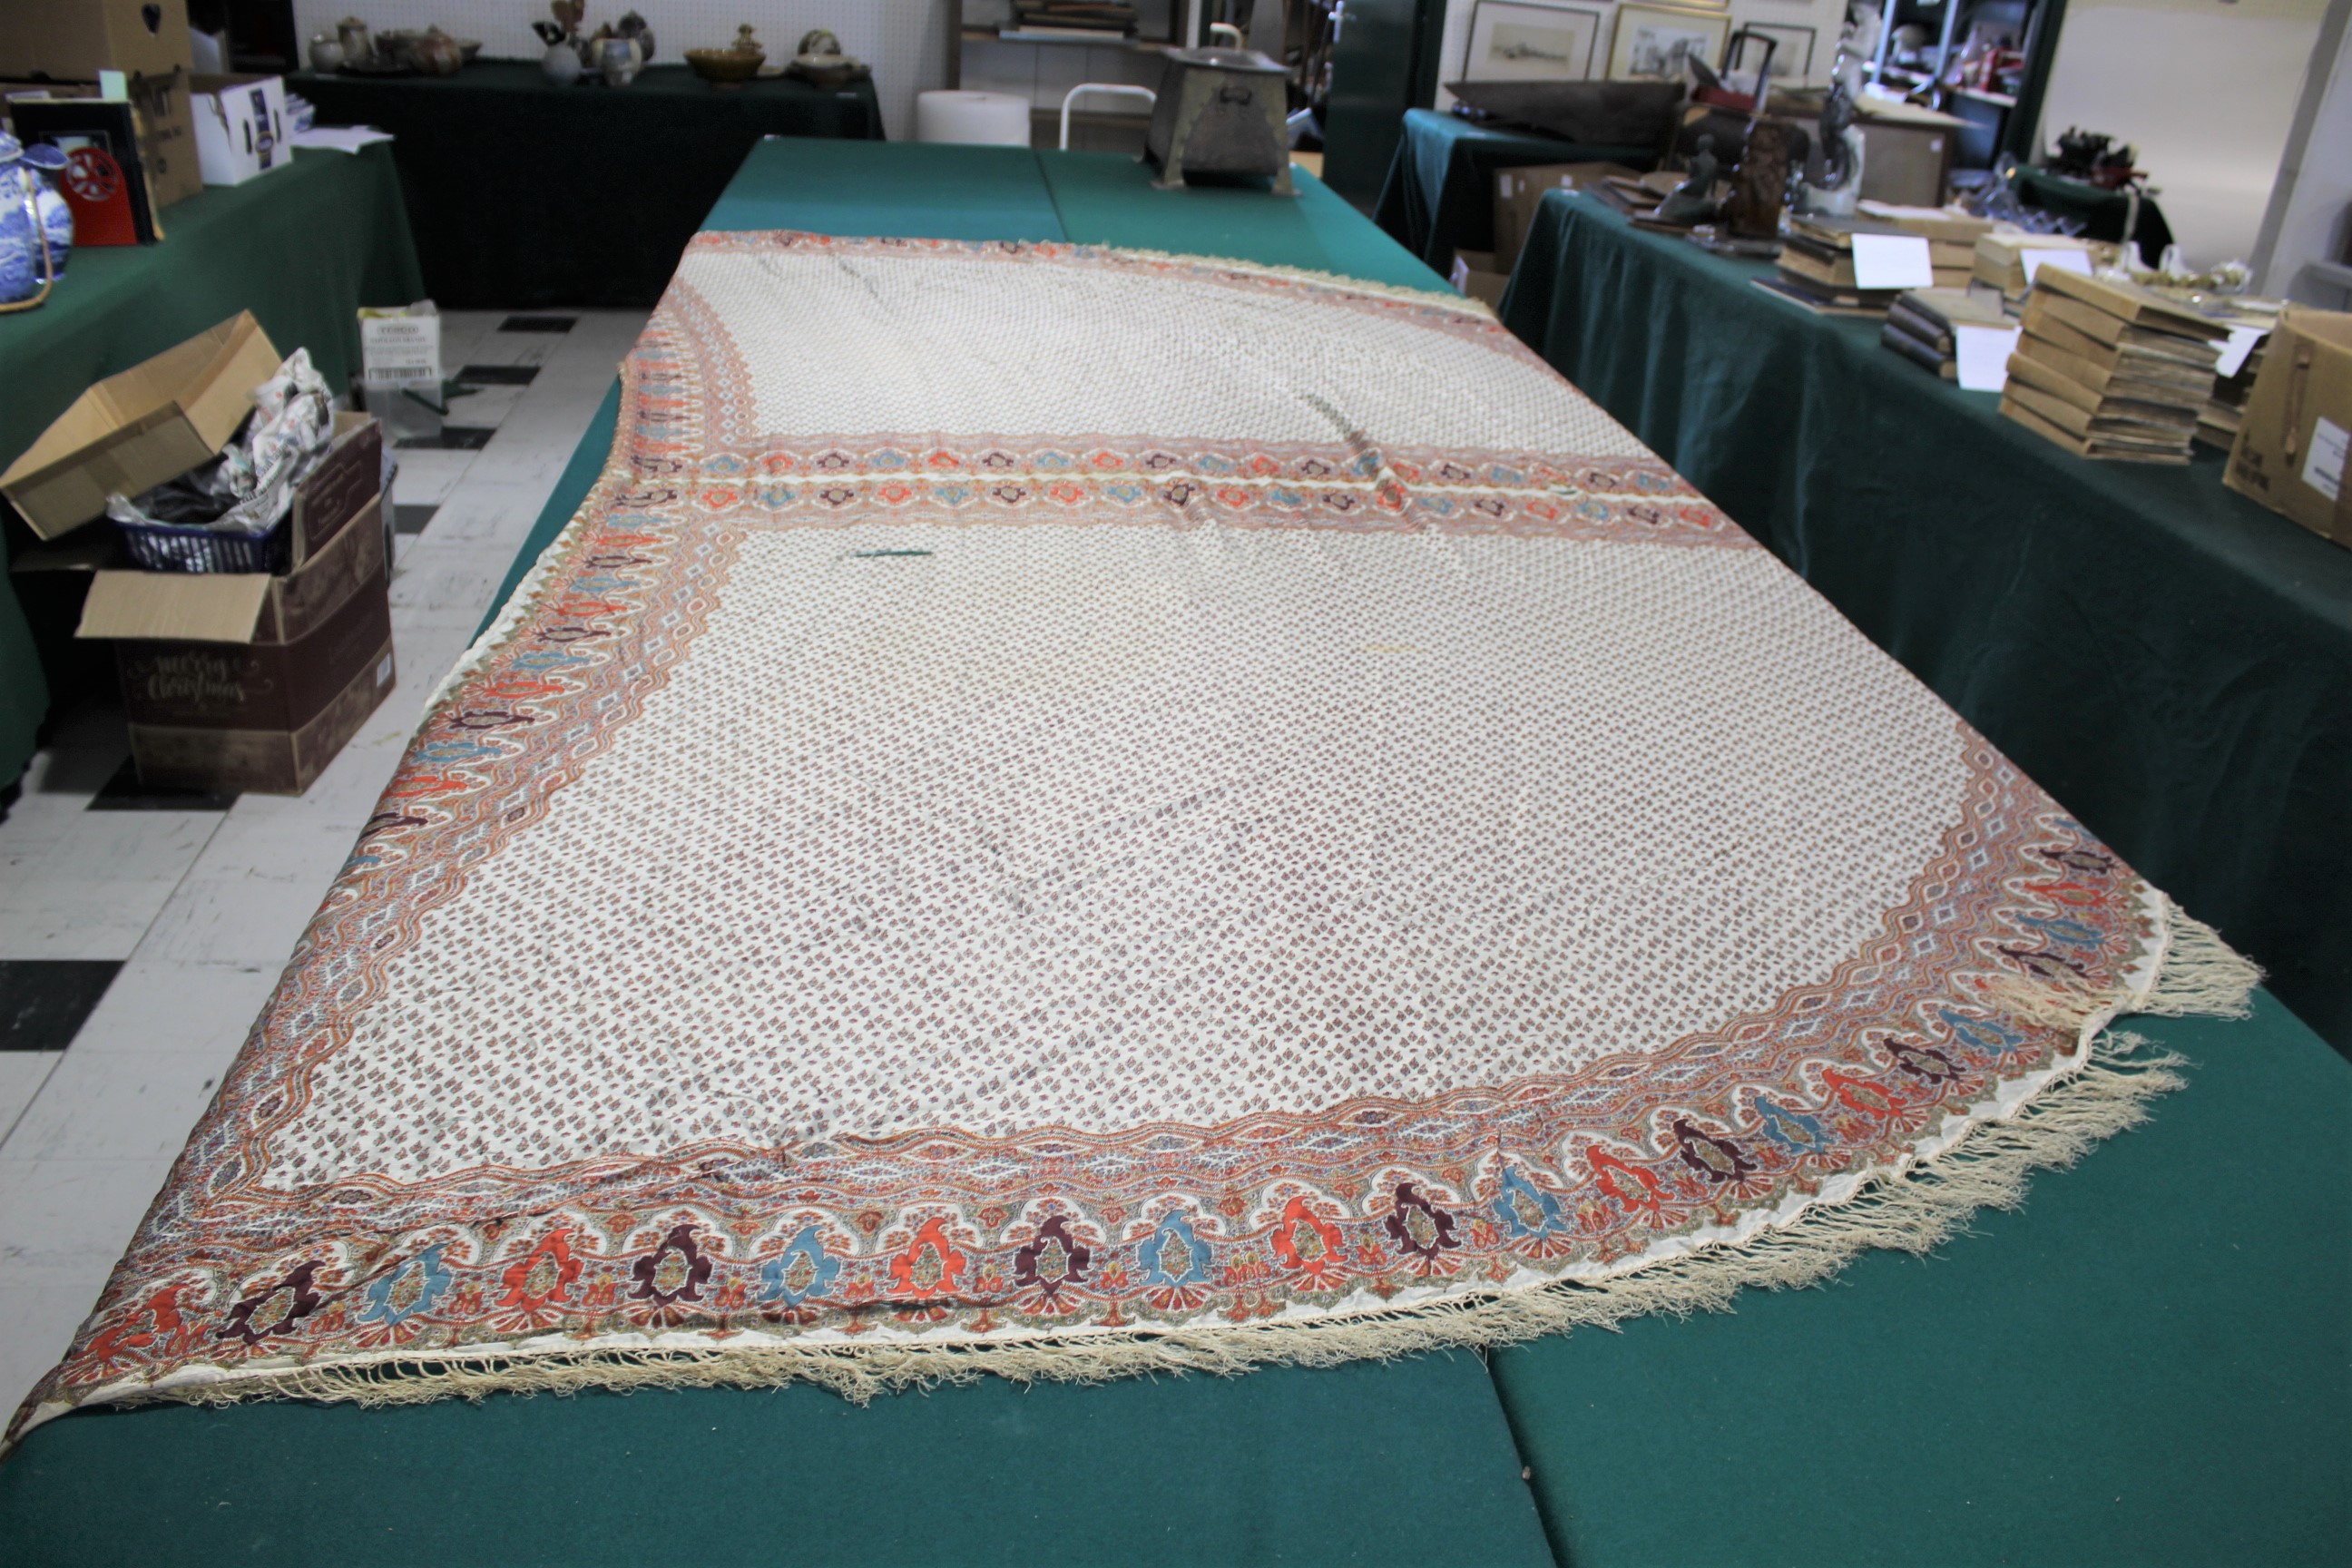 19THC PAISLEY SHAWL a mid 19thc paisley wool cashmere shawl (264cms by 126cms), and also with a fine - Image 8 of 9